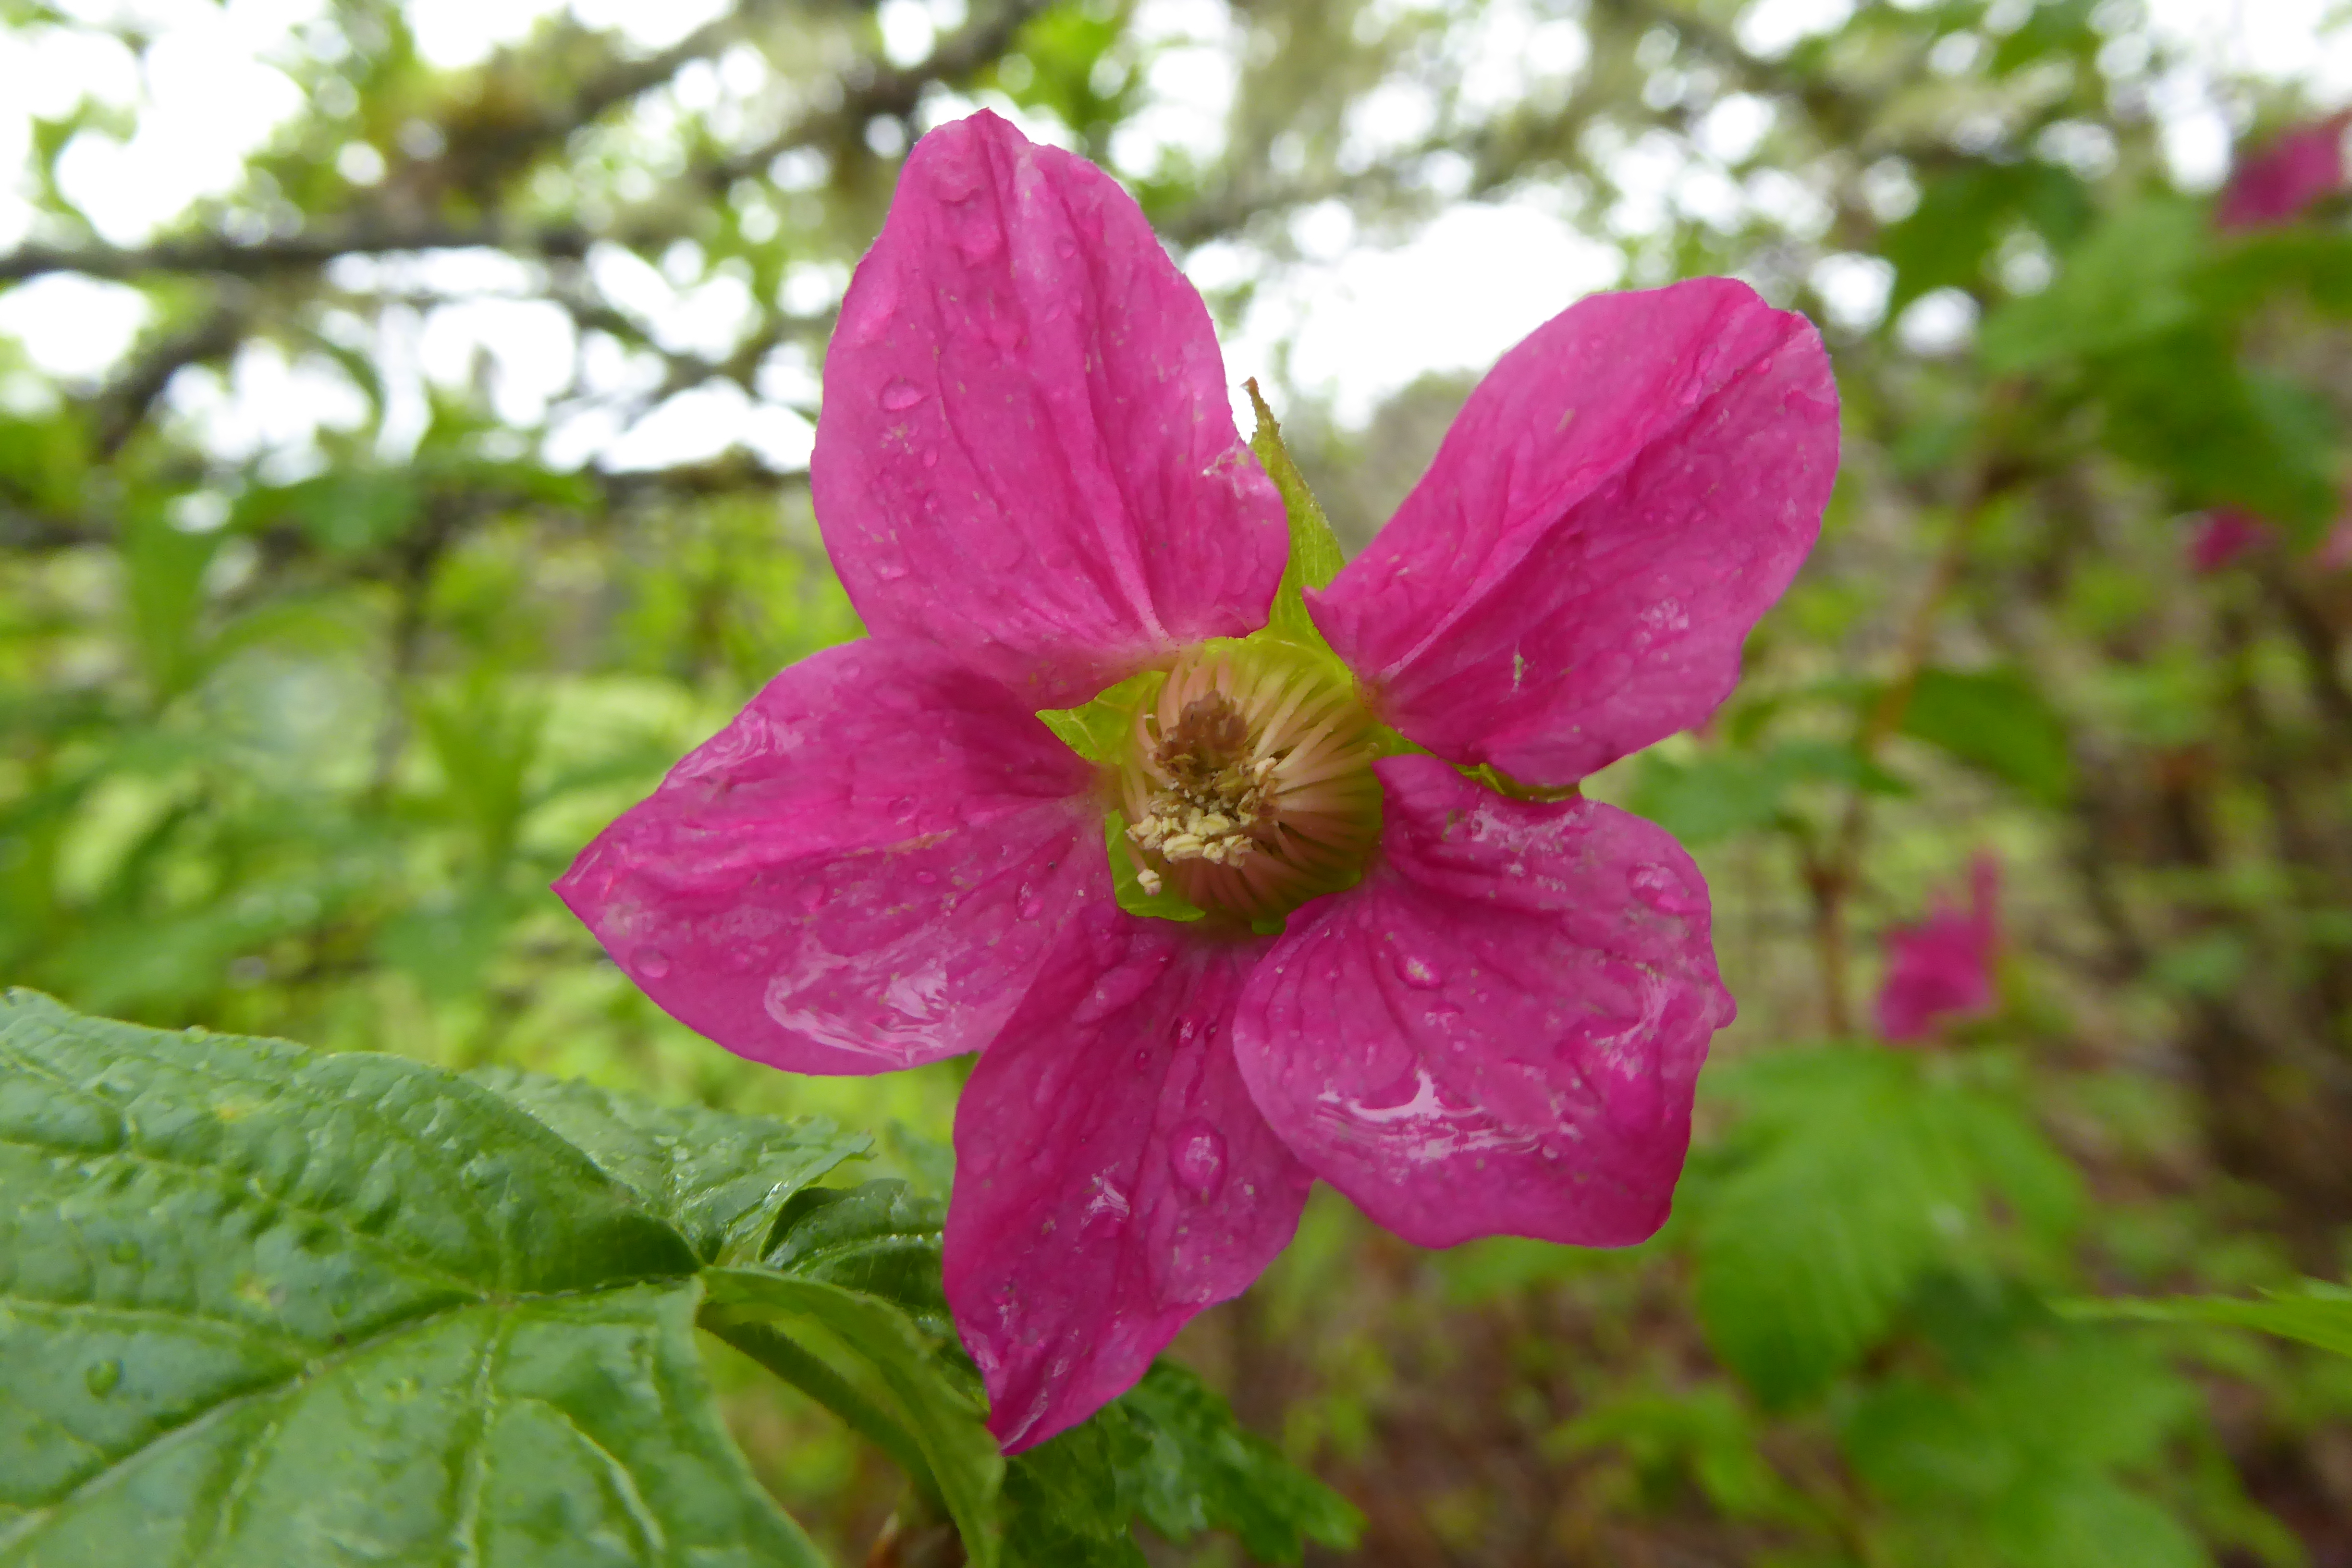 magenta colored flower with five petals